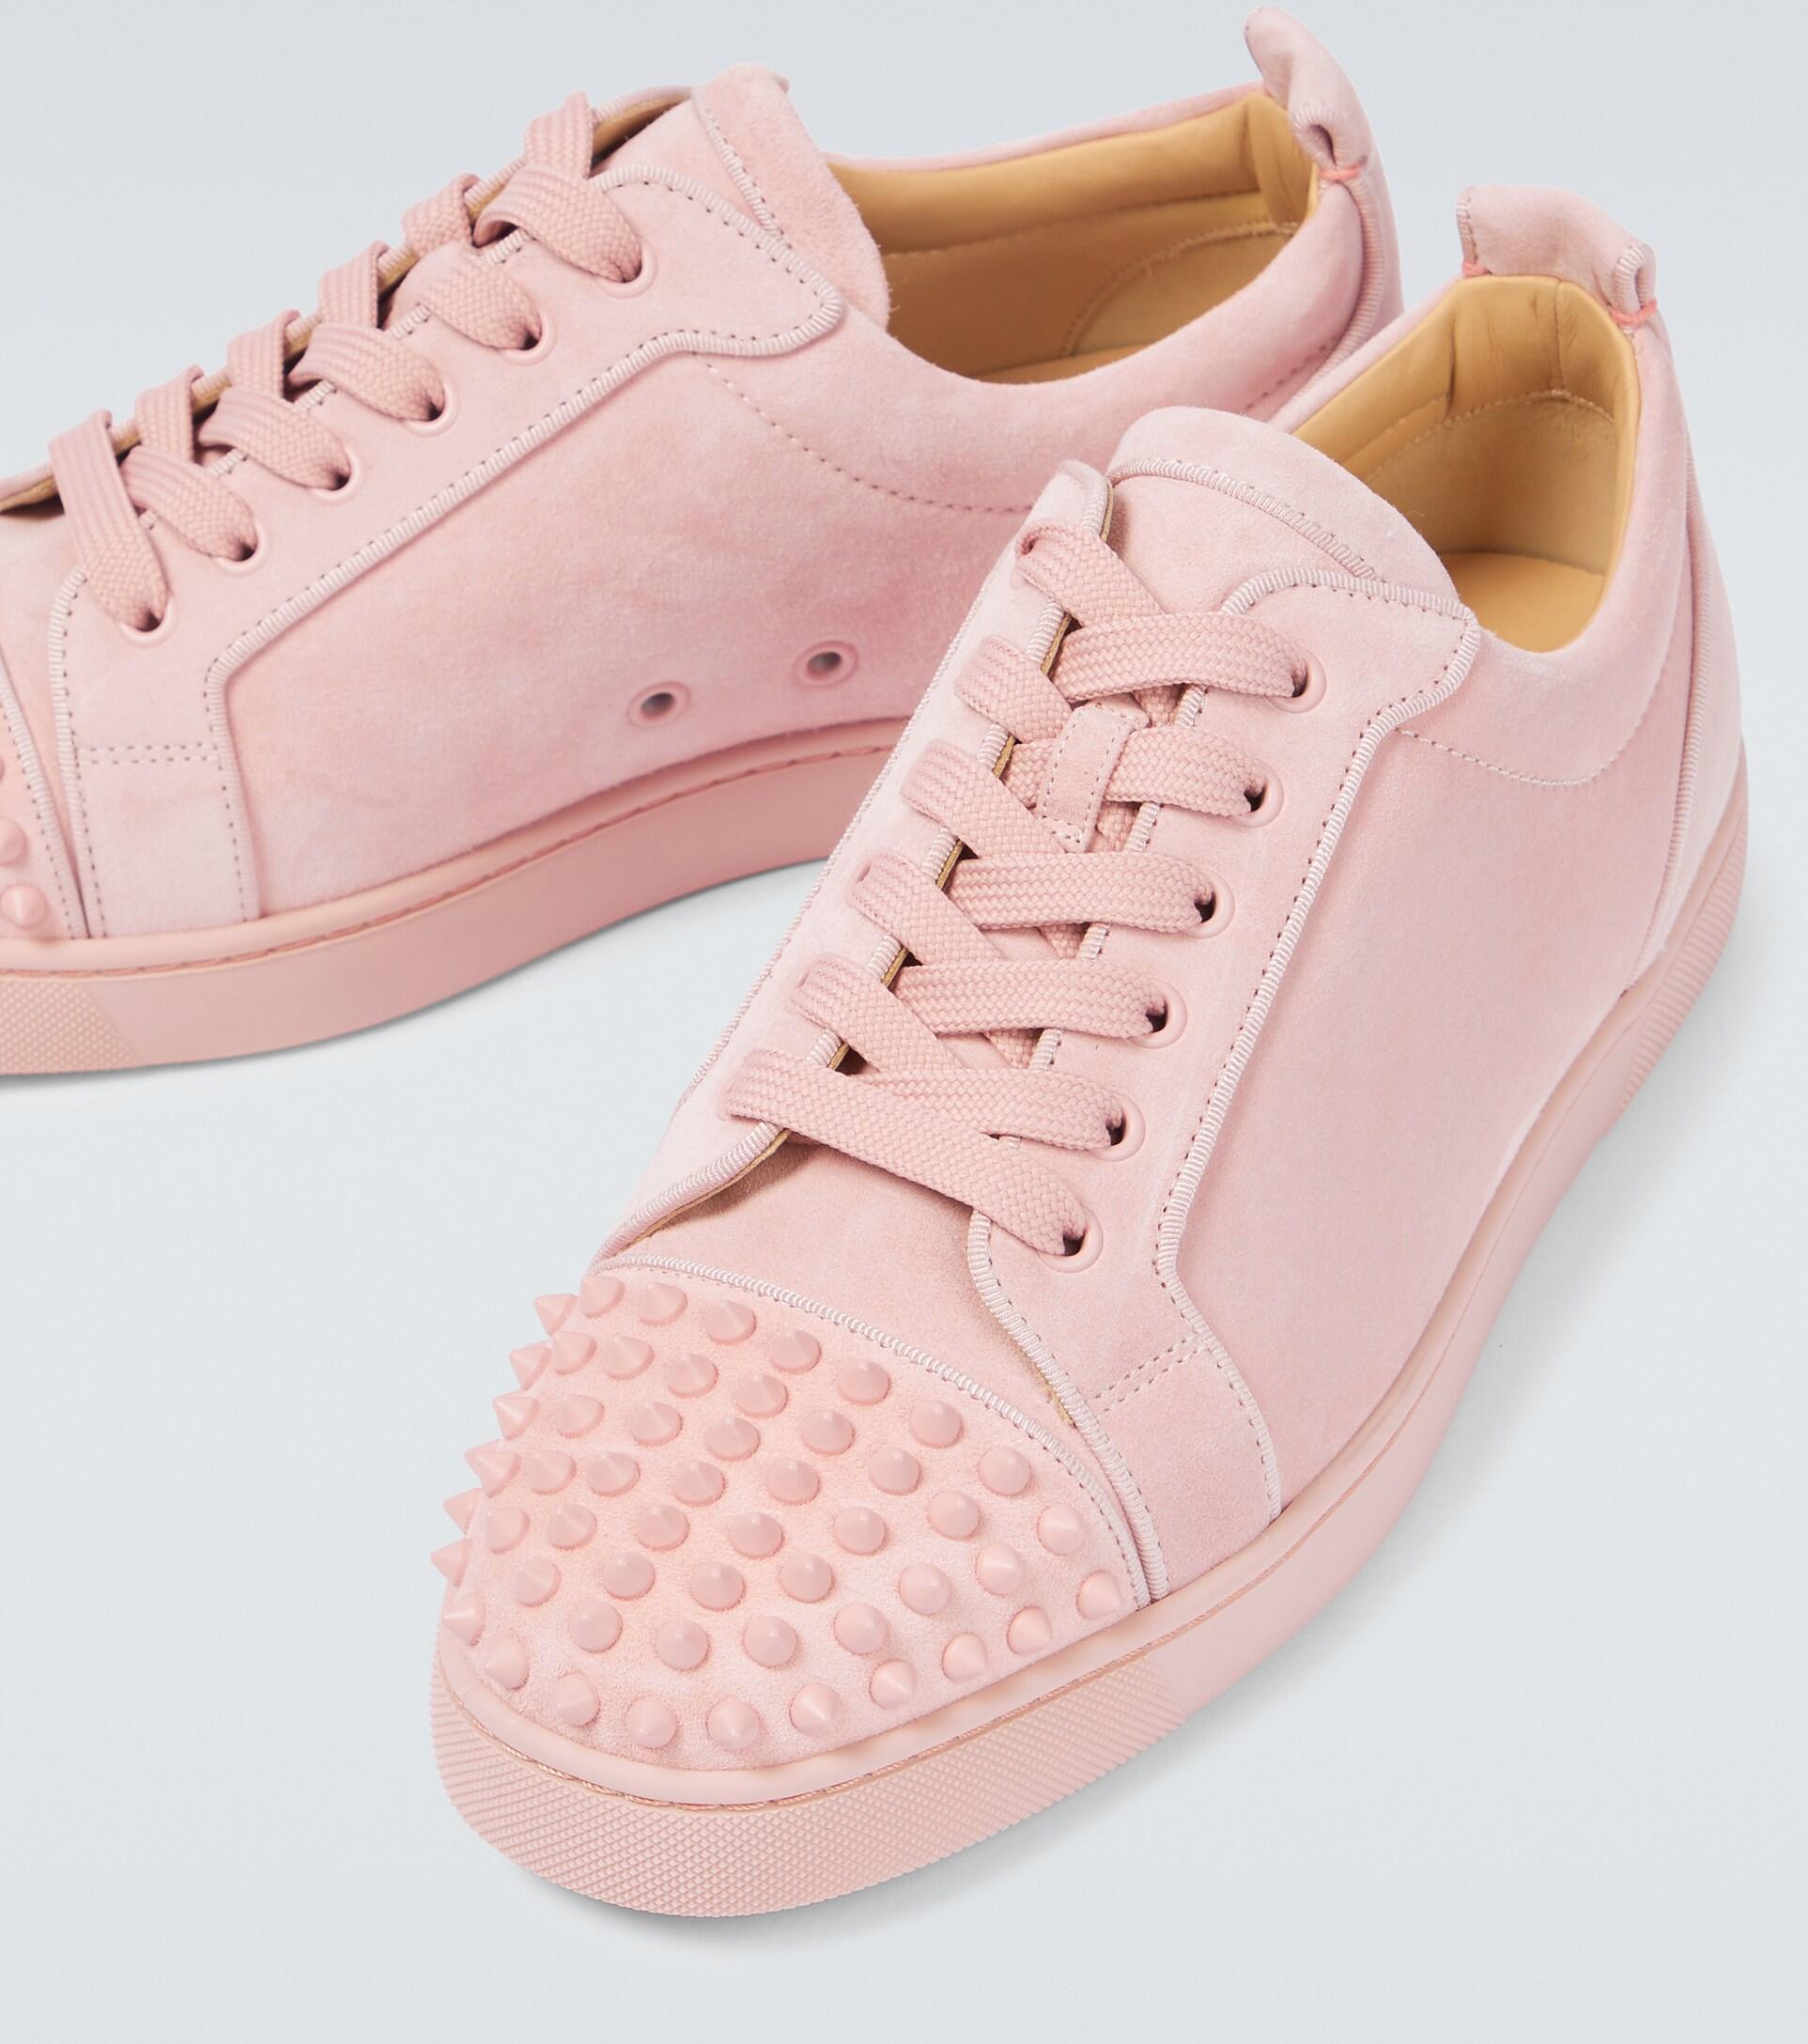 Christian Louboutin Light Pink Suede Louis Junior Spikes Sneakers Size 41